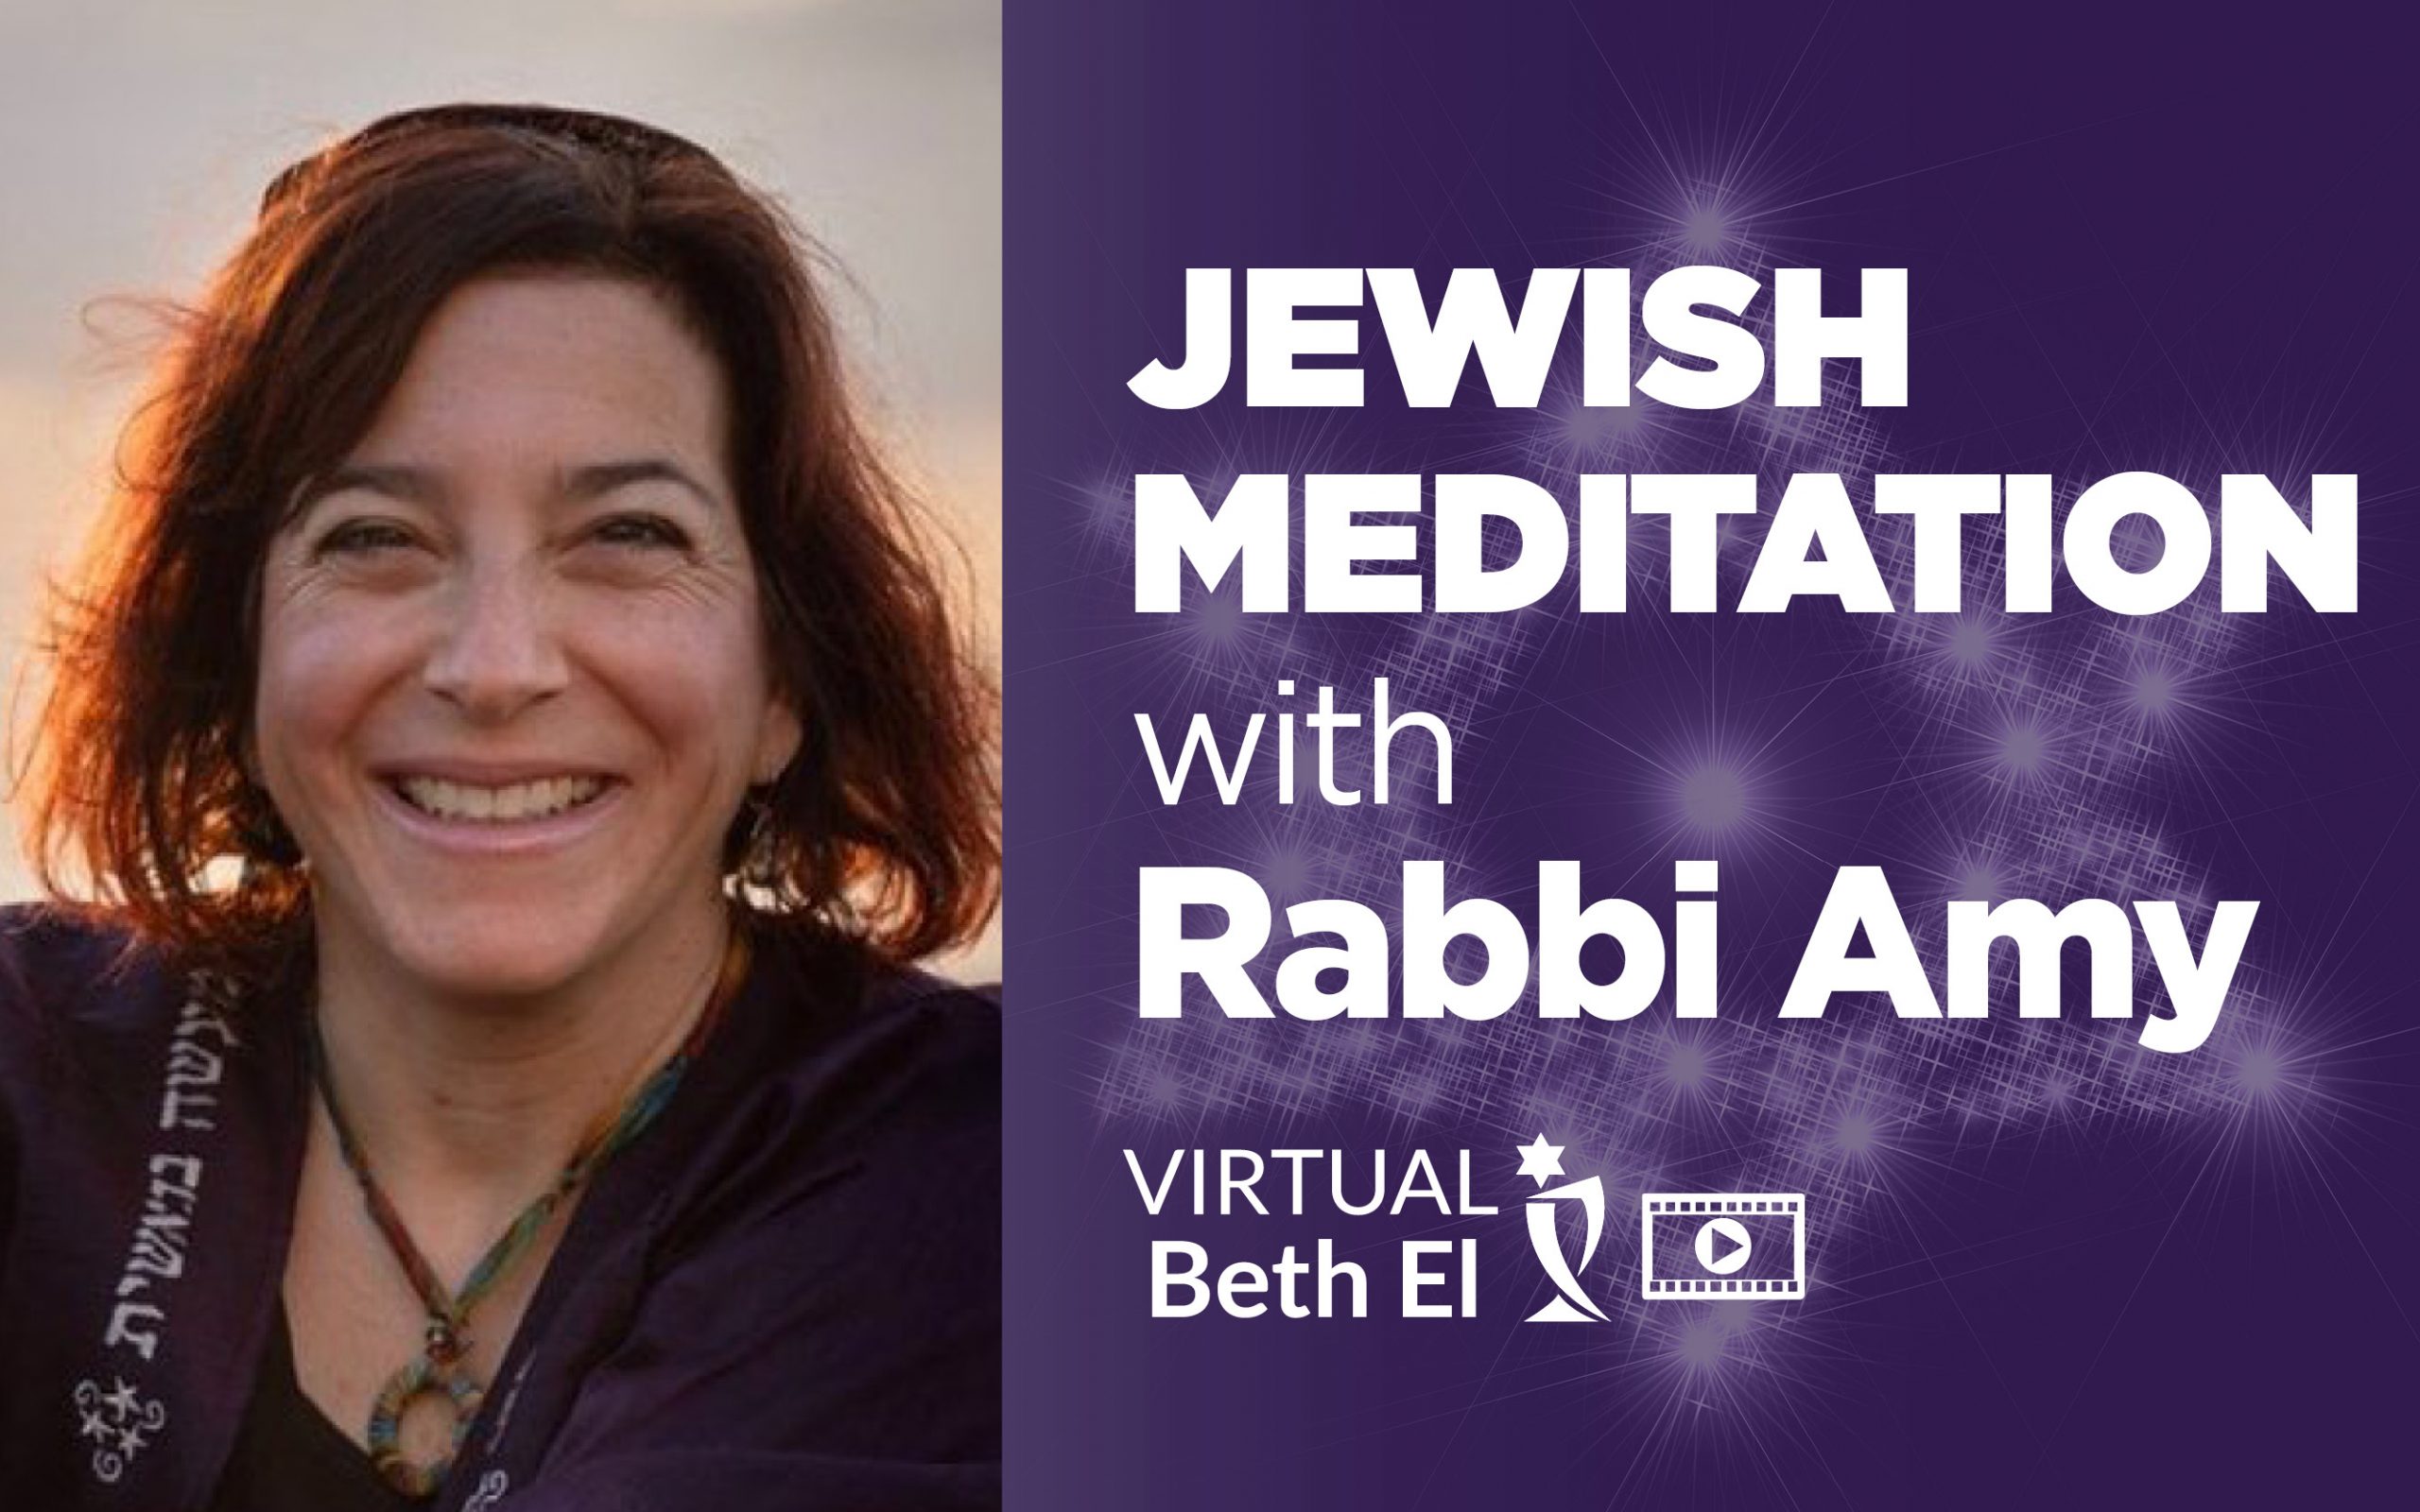 Jewish Meditation with Rabbi Amy Pessah with Temple Beth El event graphic for Temple Beth El